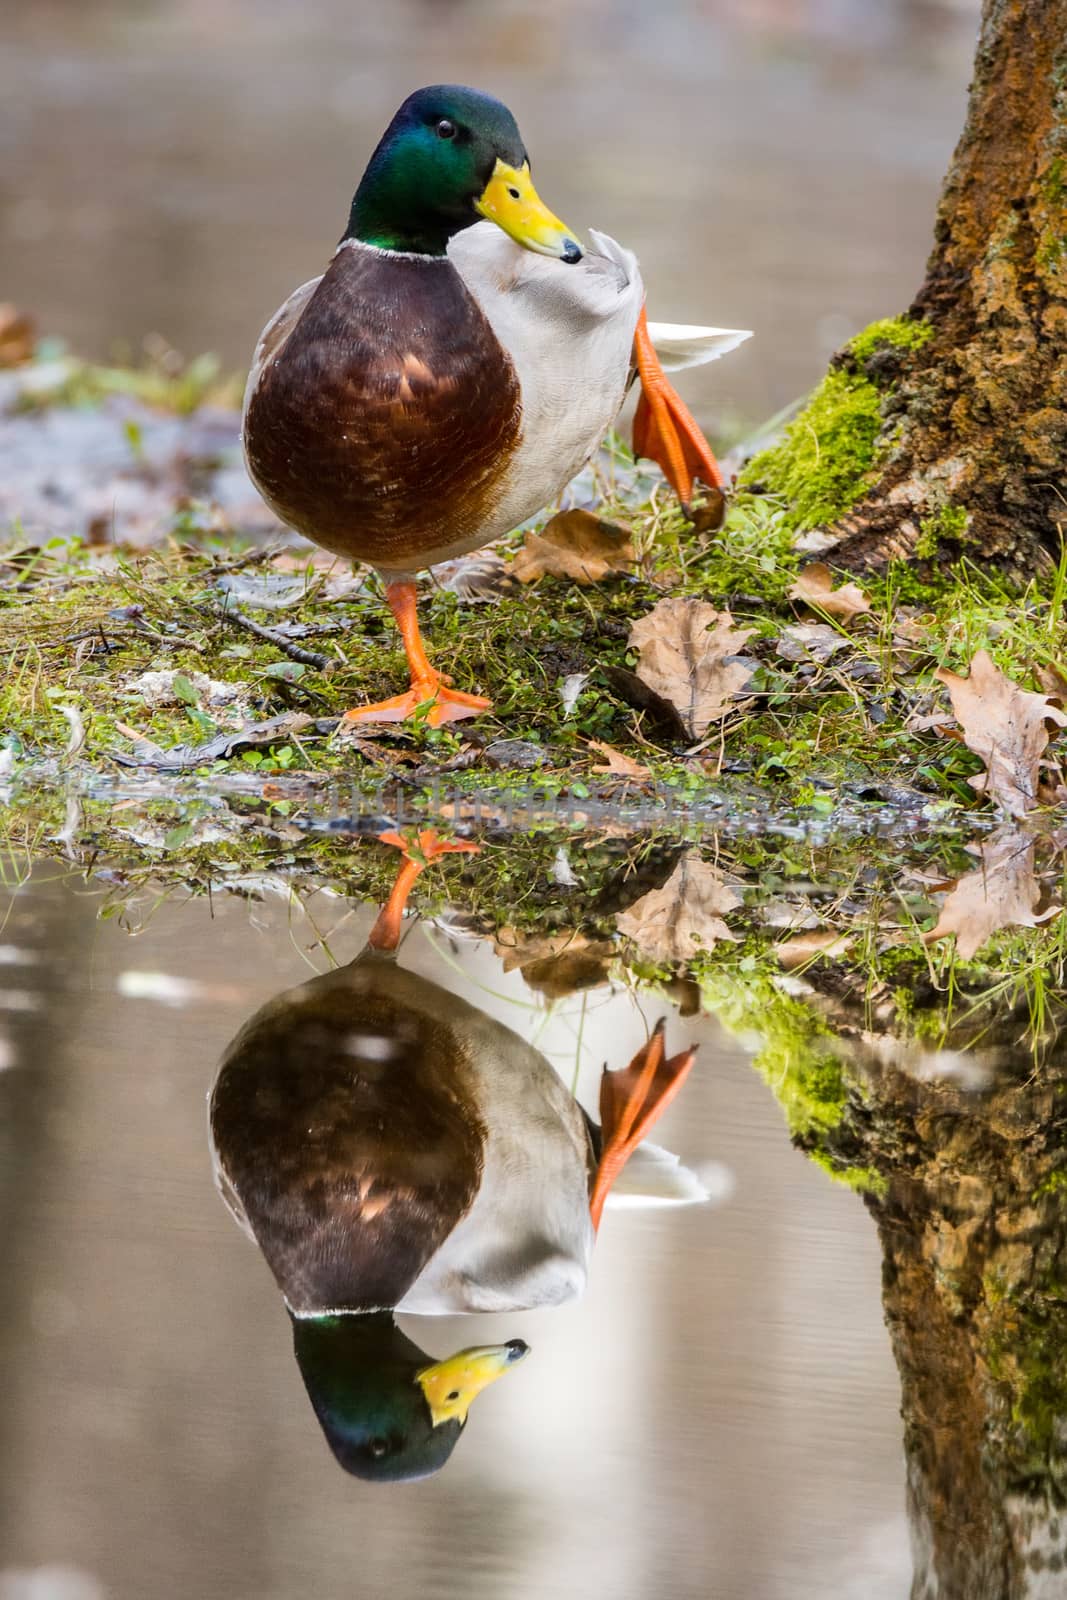 The photo shows a duck on the shore with a reflection